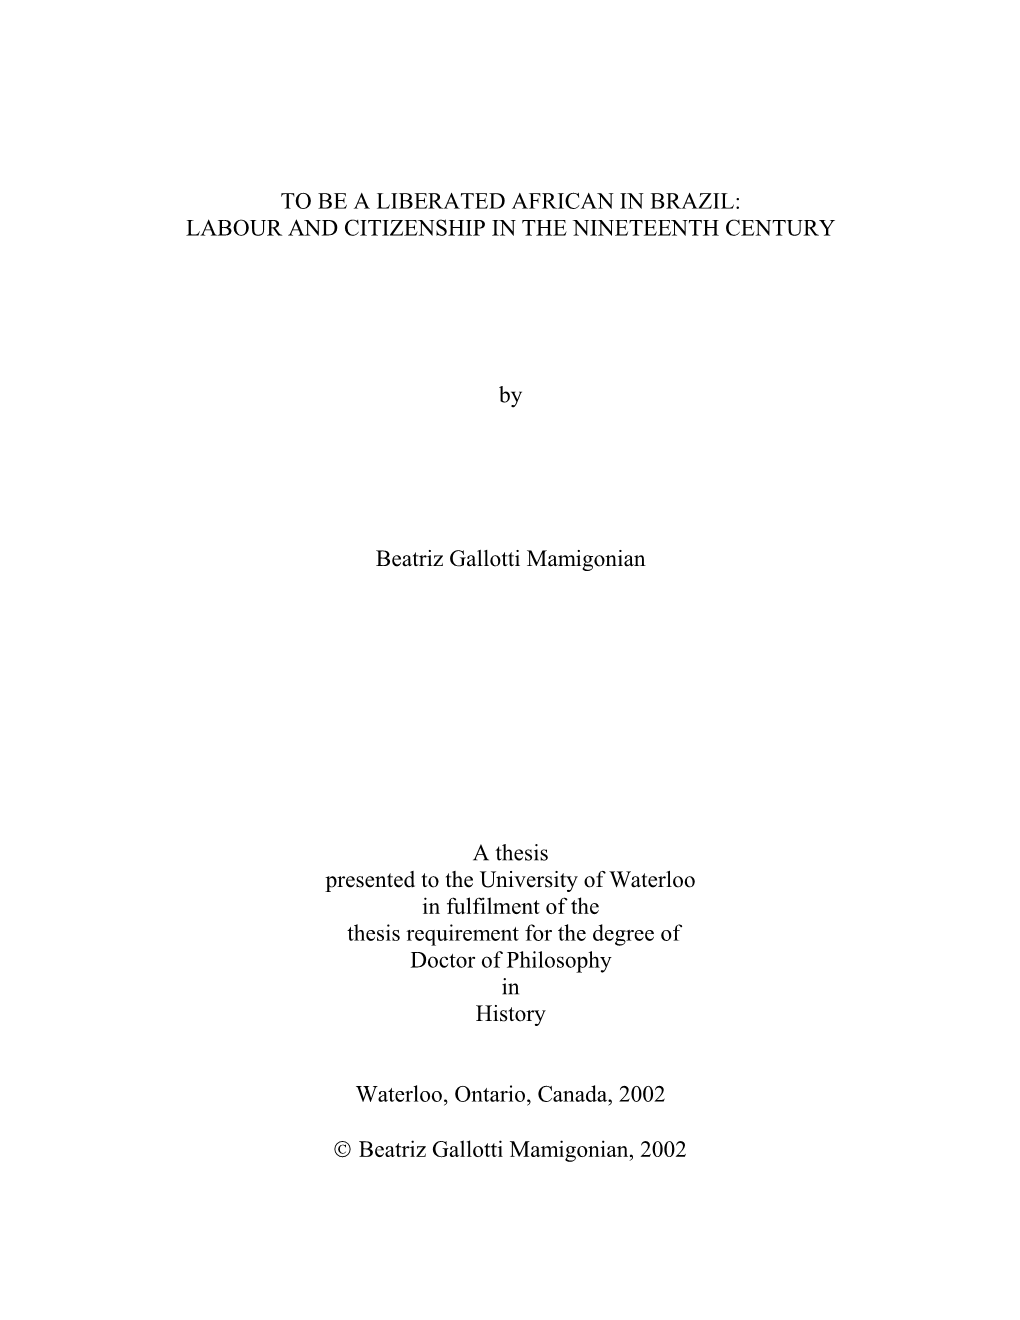 TO BE a LIBERATED AFRICAN in BRAZIL: LABOUR and CITIZENSHIP in the NINETEENTH CENTURY by Beatriz Gallotti Mamigonian a Thesis Pr